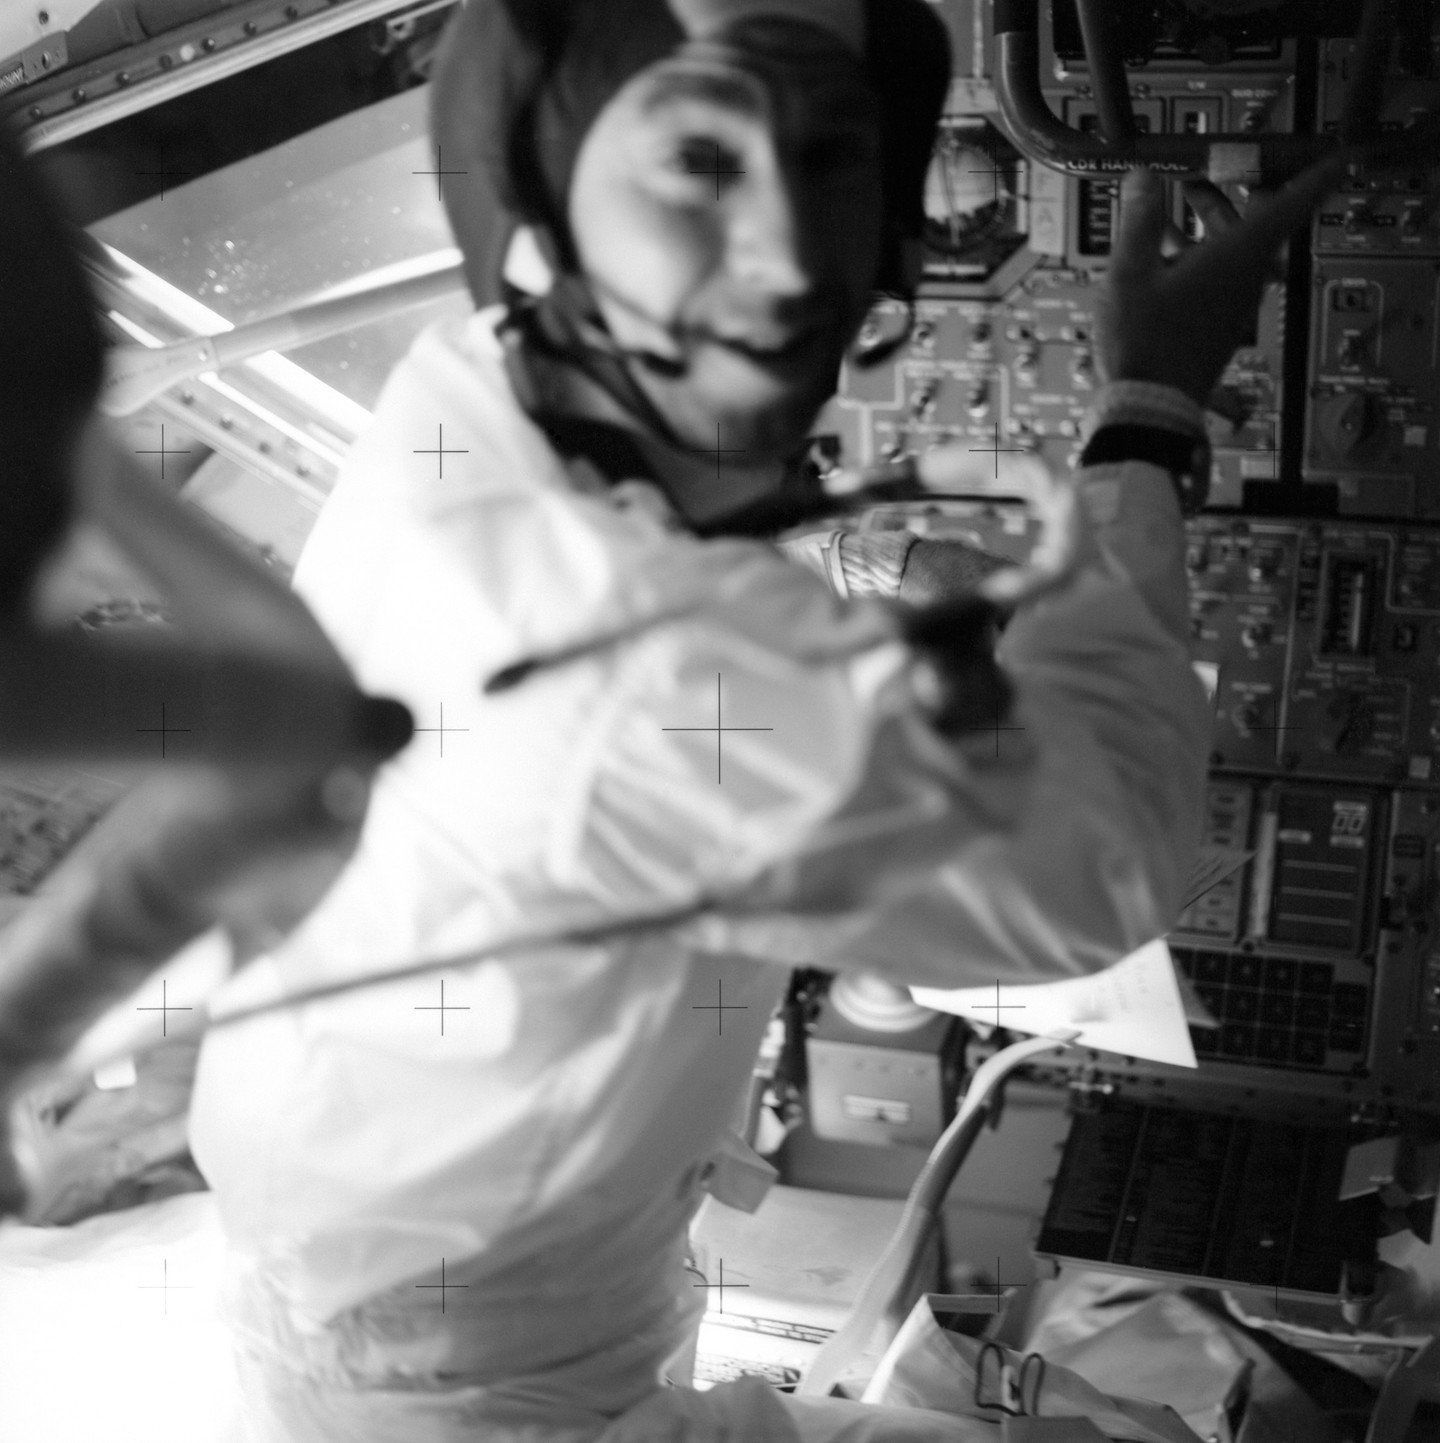 James Lovell at his position in the Lunar Module - Image courtesy NASA